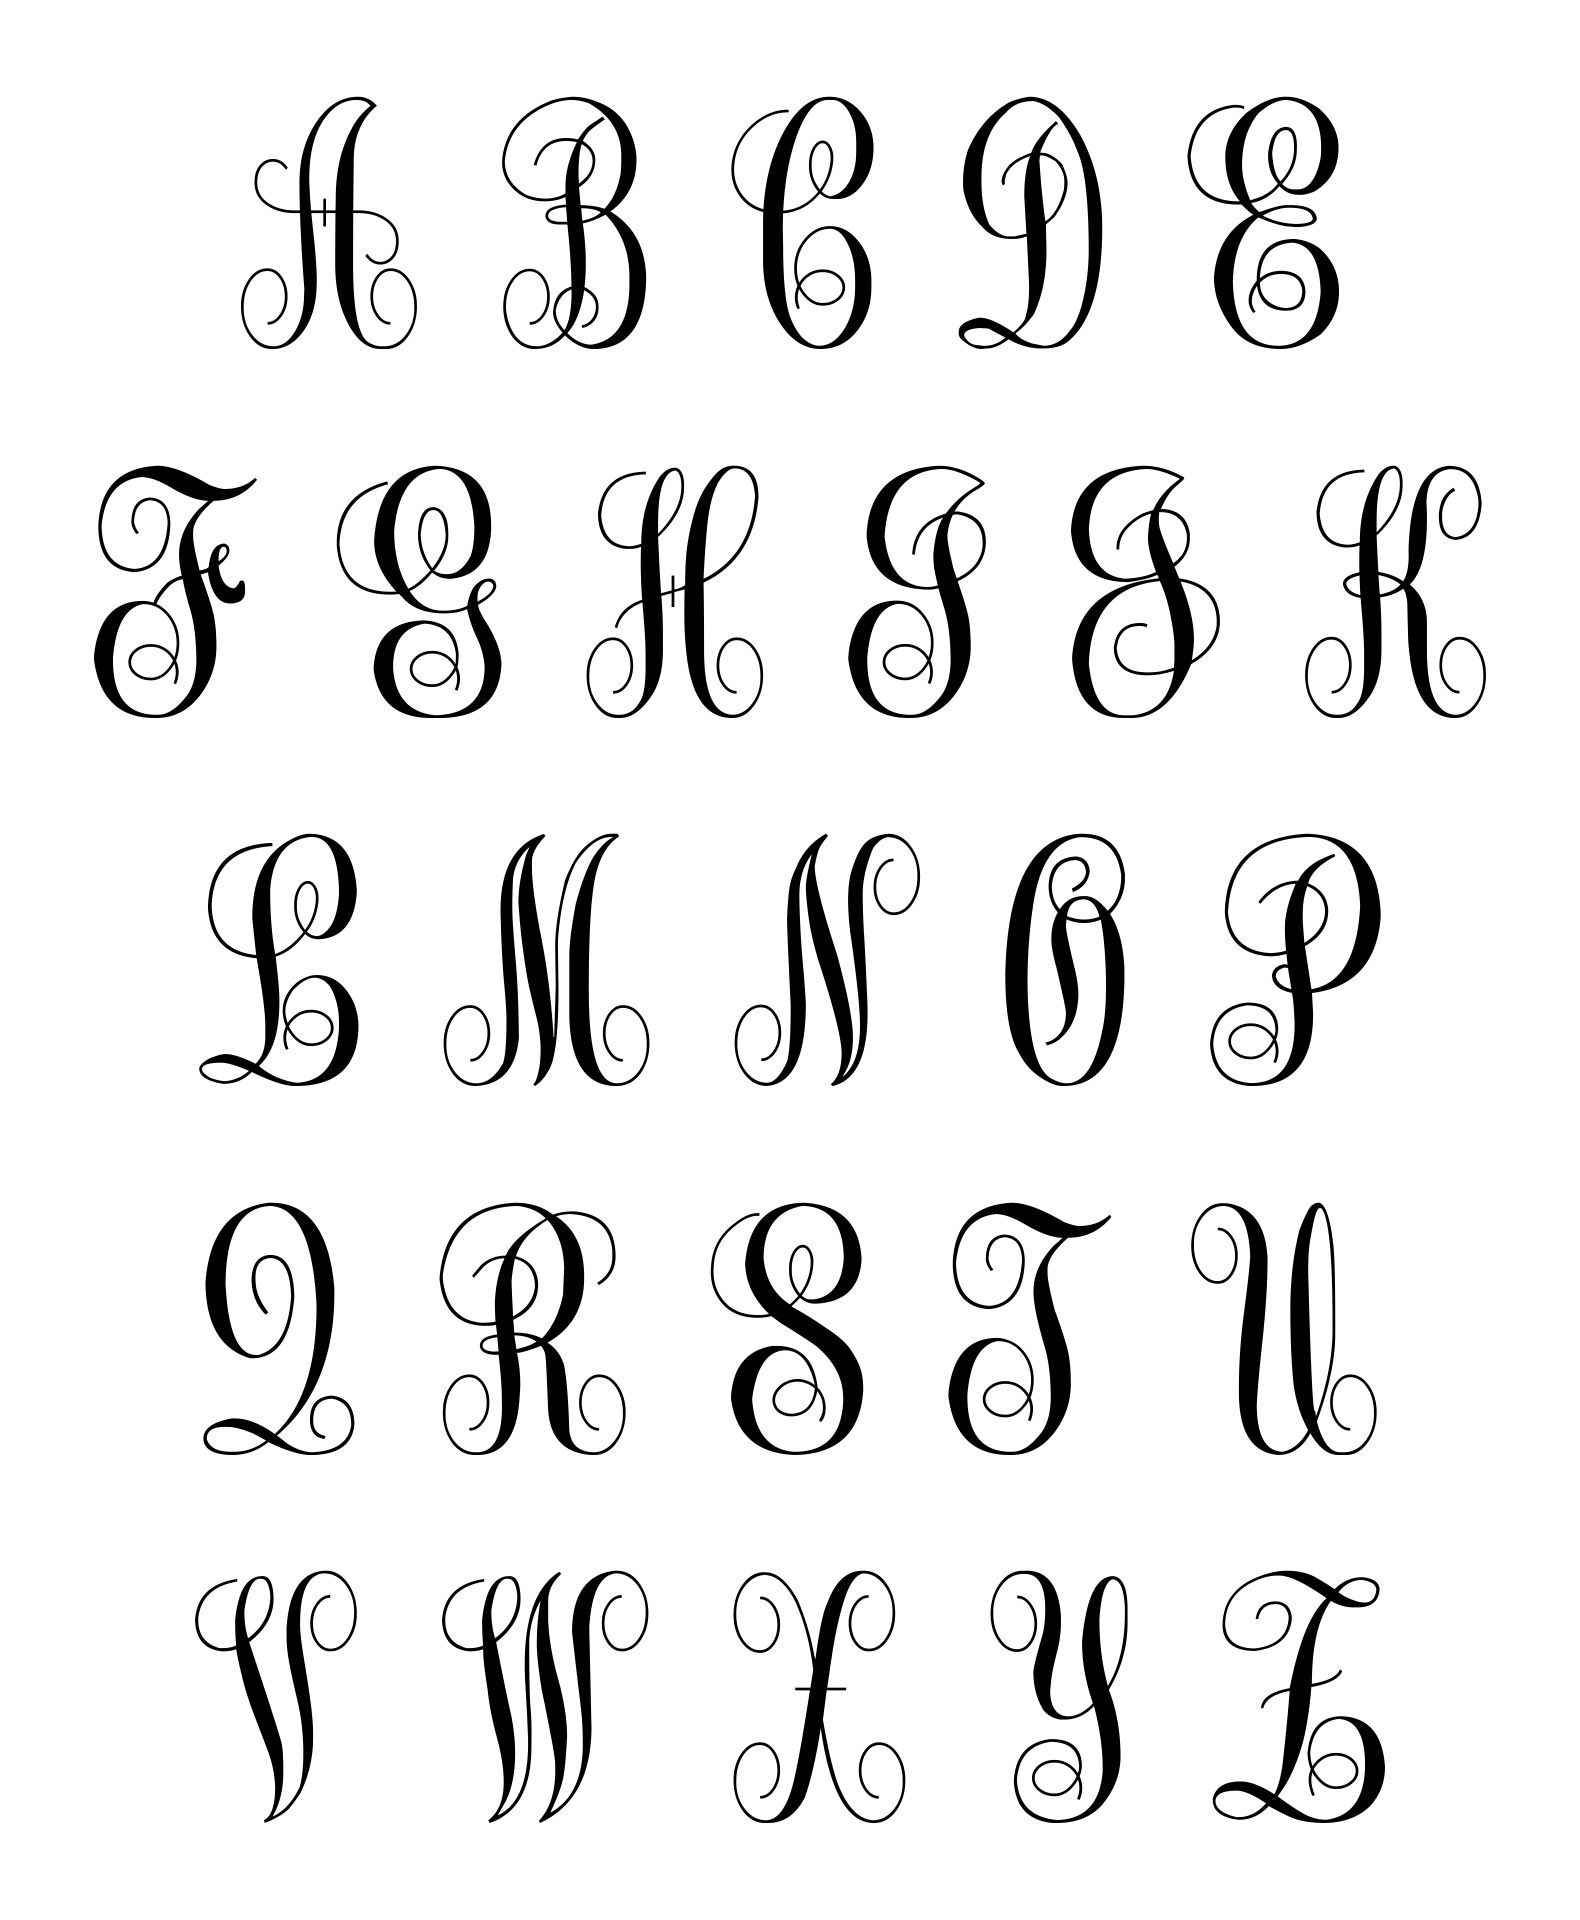 Letters Of The Different Font Styles Alphabet